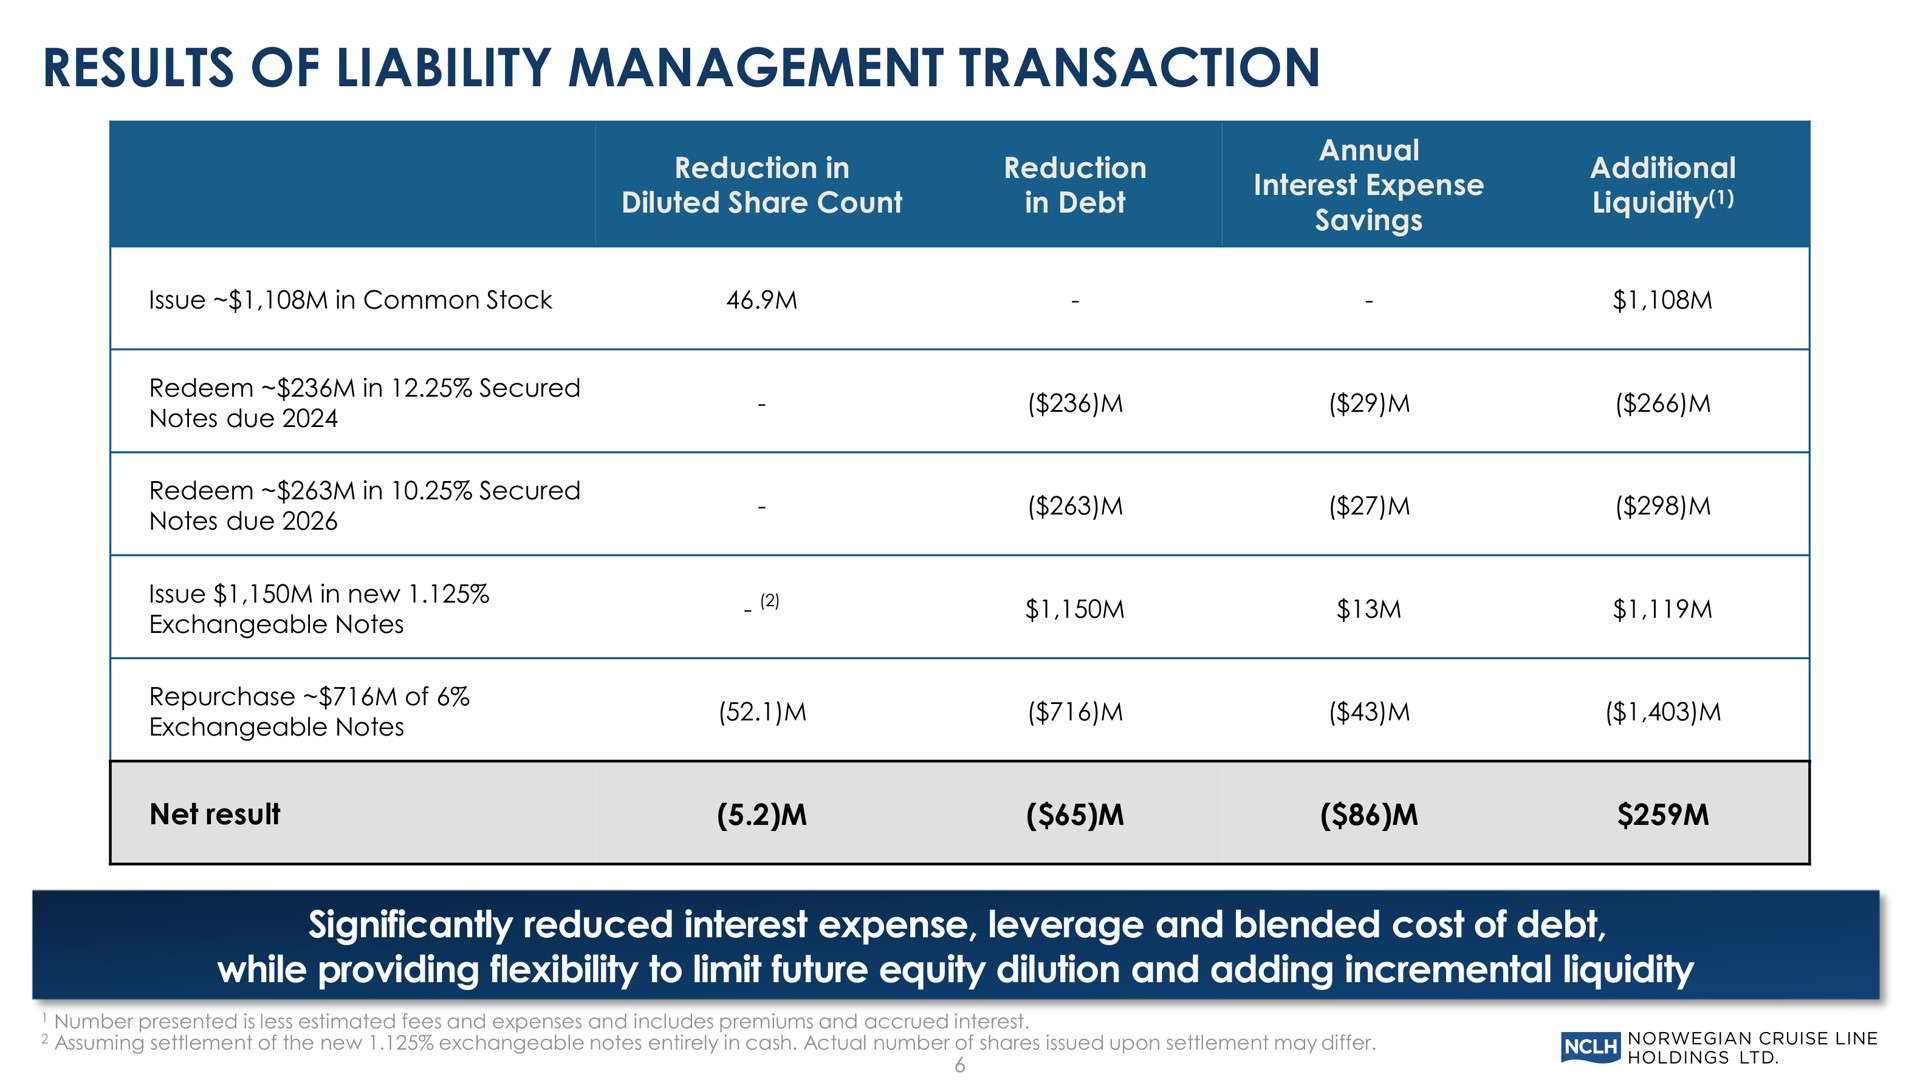 results of liability management transaction significantly reduced interest expense leverage and blended cost of debt while providing flexibility to limit future equity dilution and adding incremental liquidity | Norwegian Cruise Line